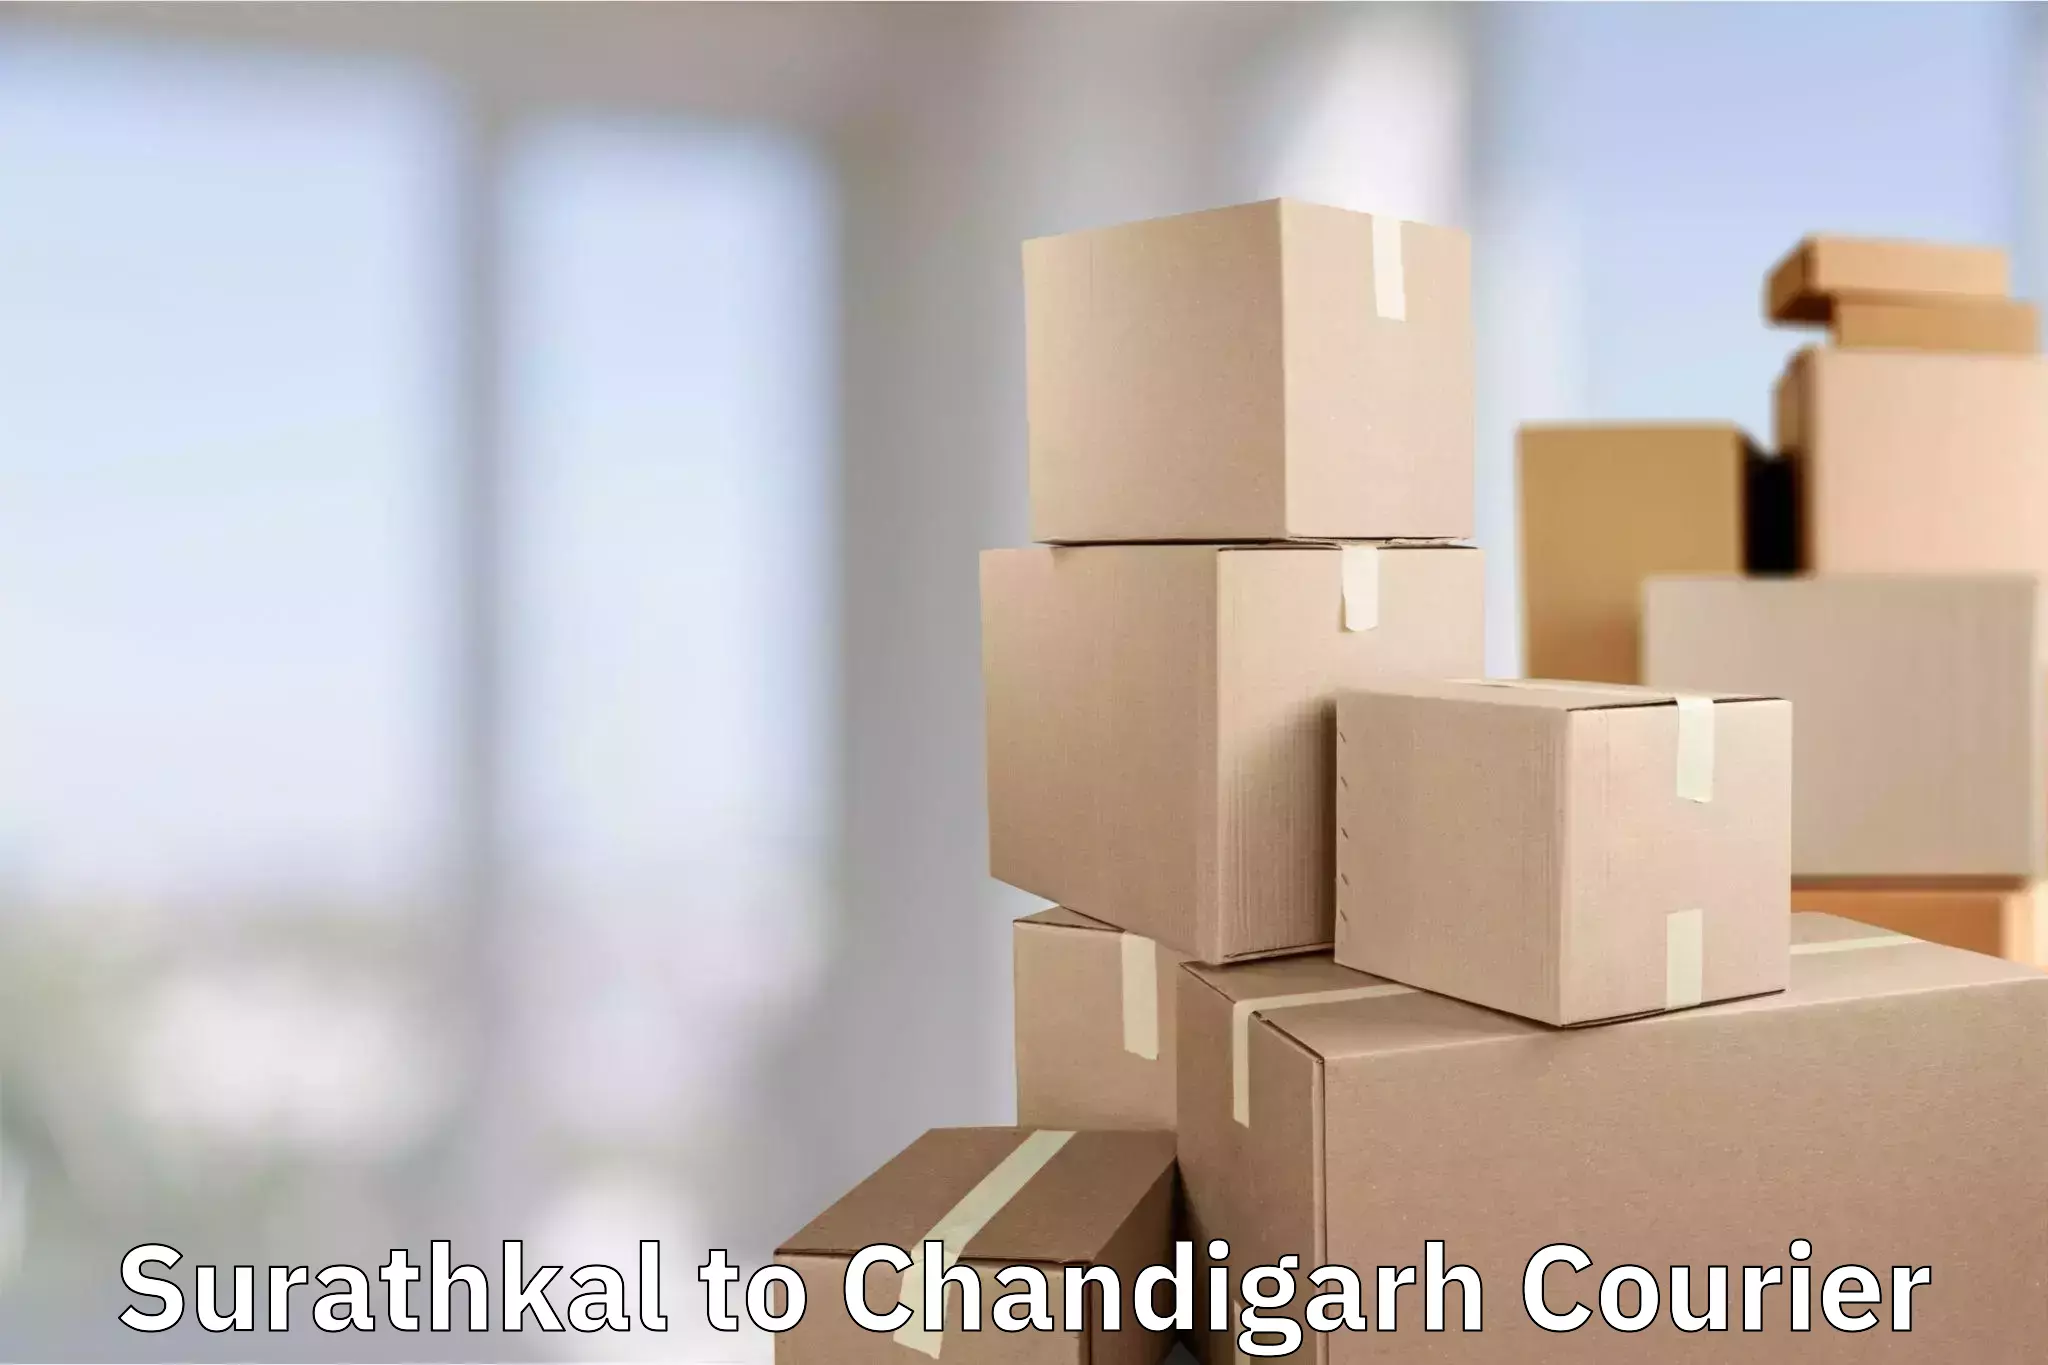 Luggage shipment processing Surathkal to Chandigarh